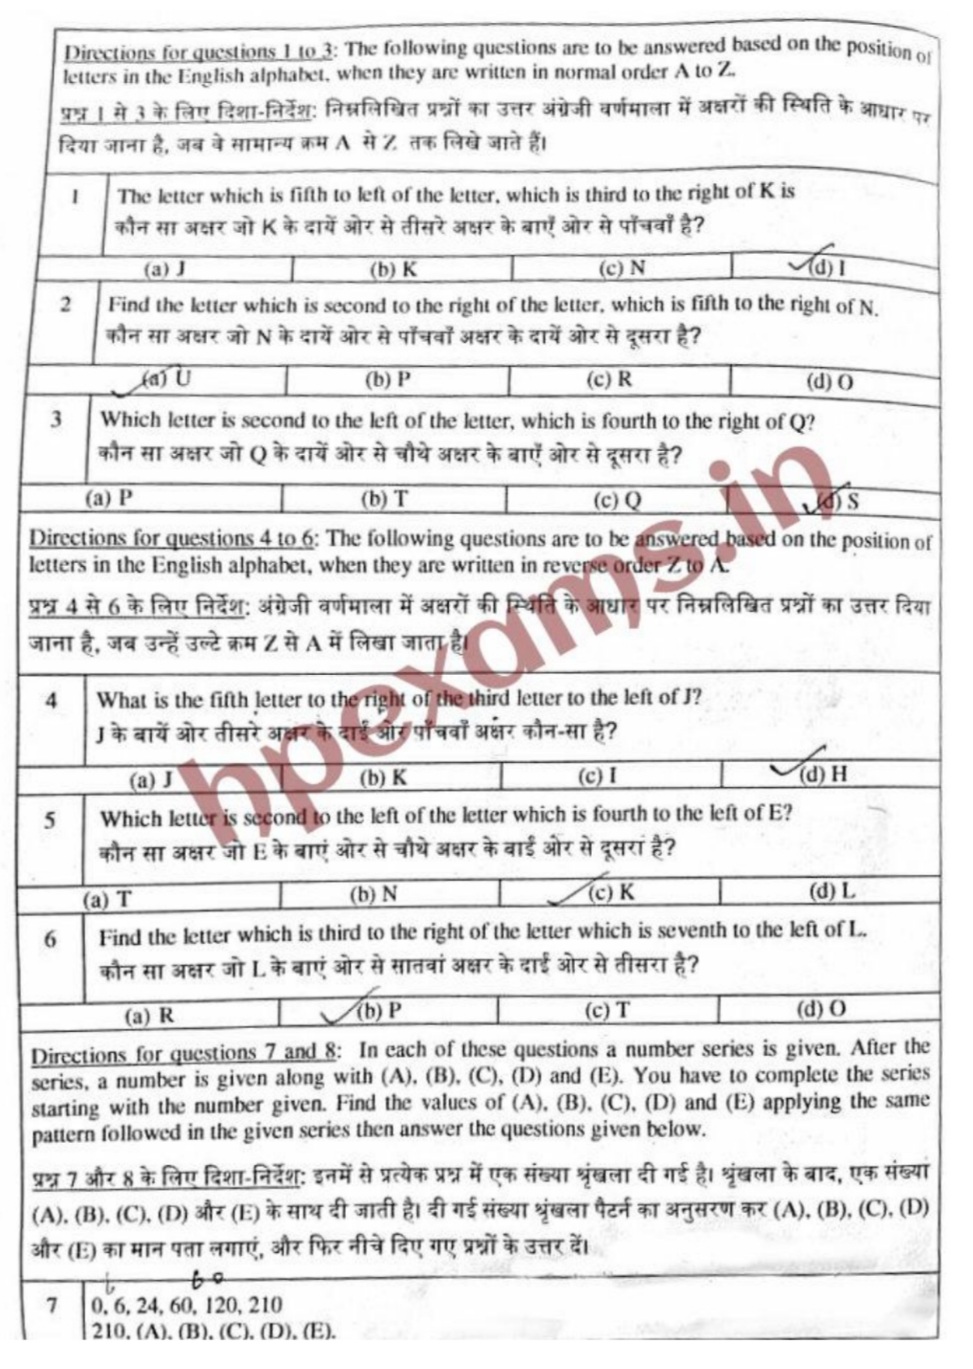 hpas-prlm-2019-aptitude-question-paper-hpexams-in